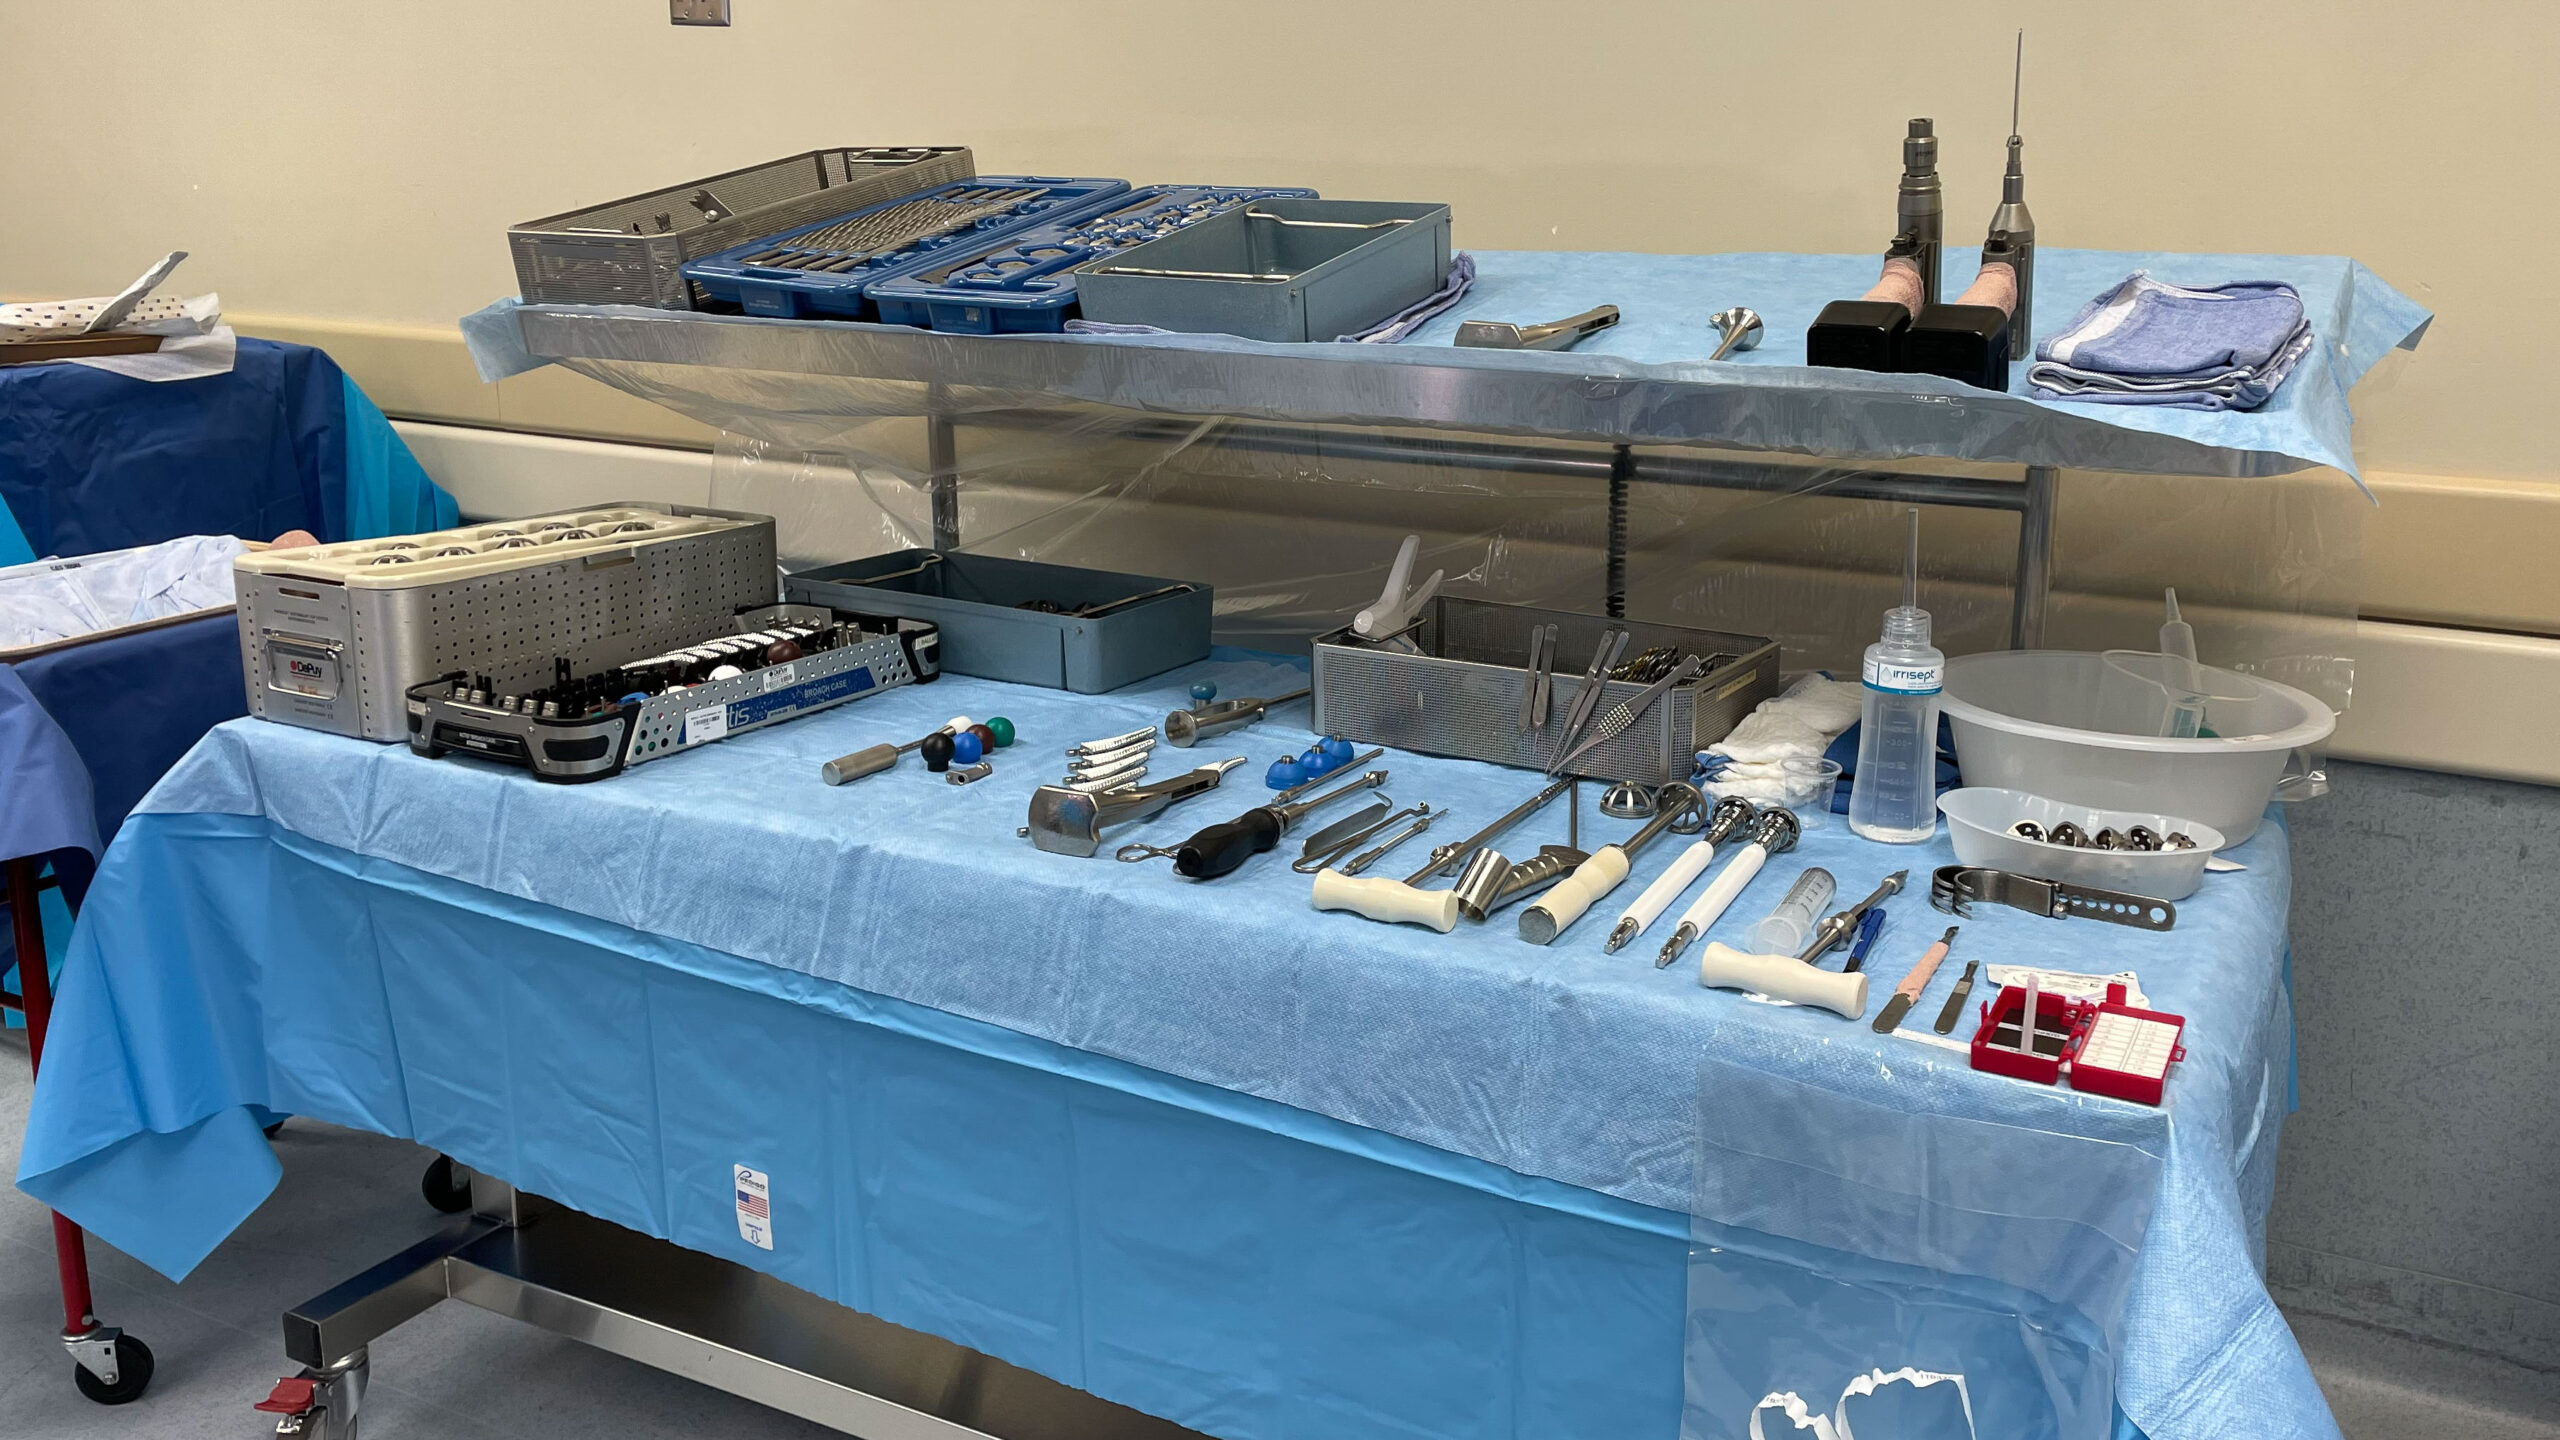 two-tier surgical back table in operating room set up with a blue sterile drape and surgical instruments